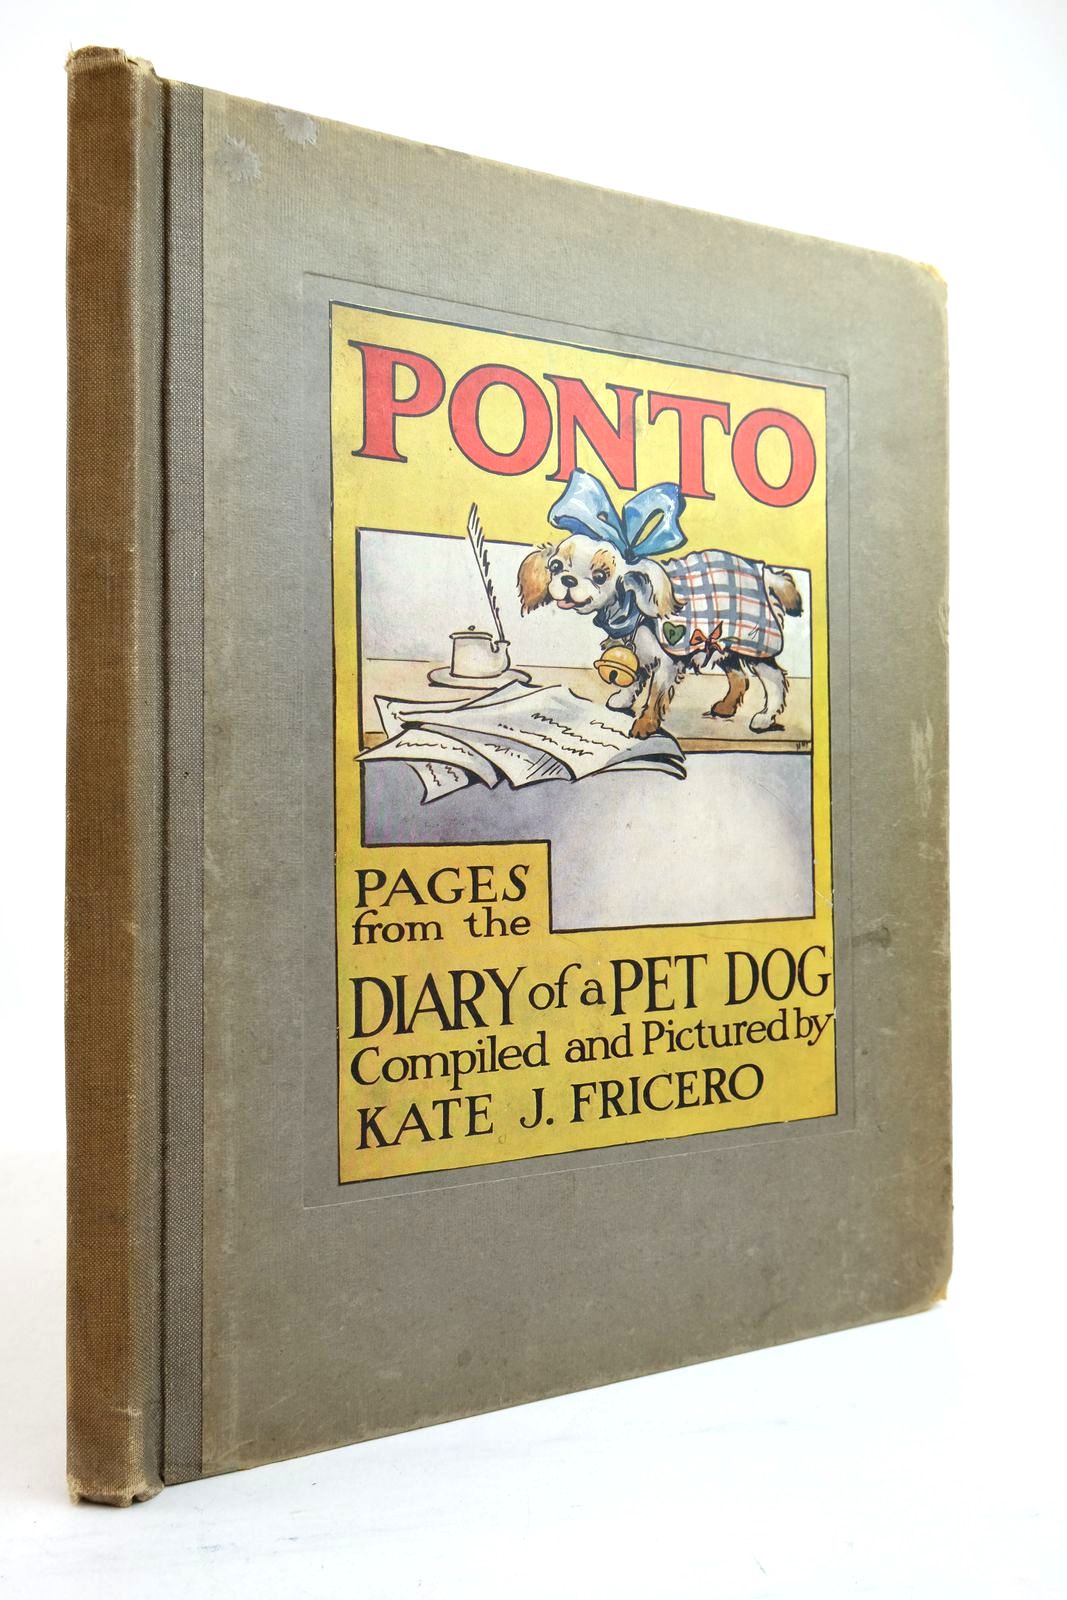 Photo of PONTO PAGES FROM THE DIARY OF A PET DOG written by Fricero, Kate J. illustrated by Fricero, Kate J. published by Blackie & Son Ltd. (STOCK CODE: 2134713)  for sale by Stella & Rose's Books